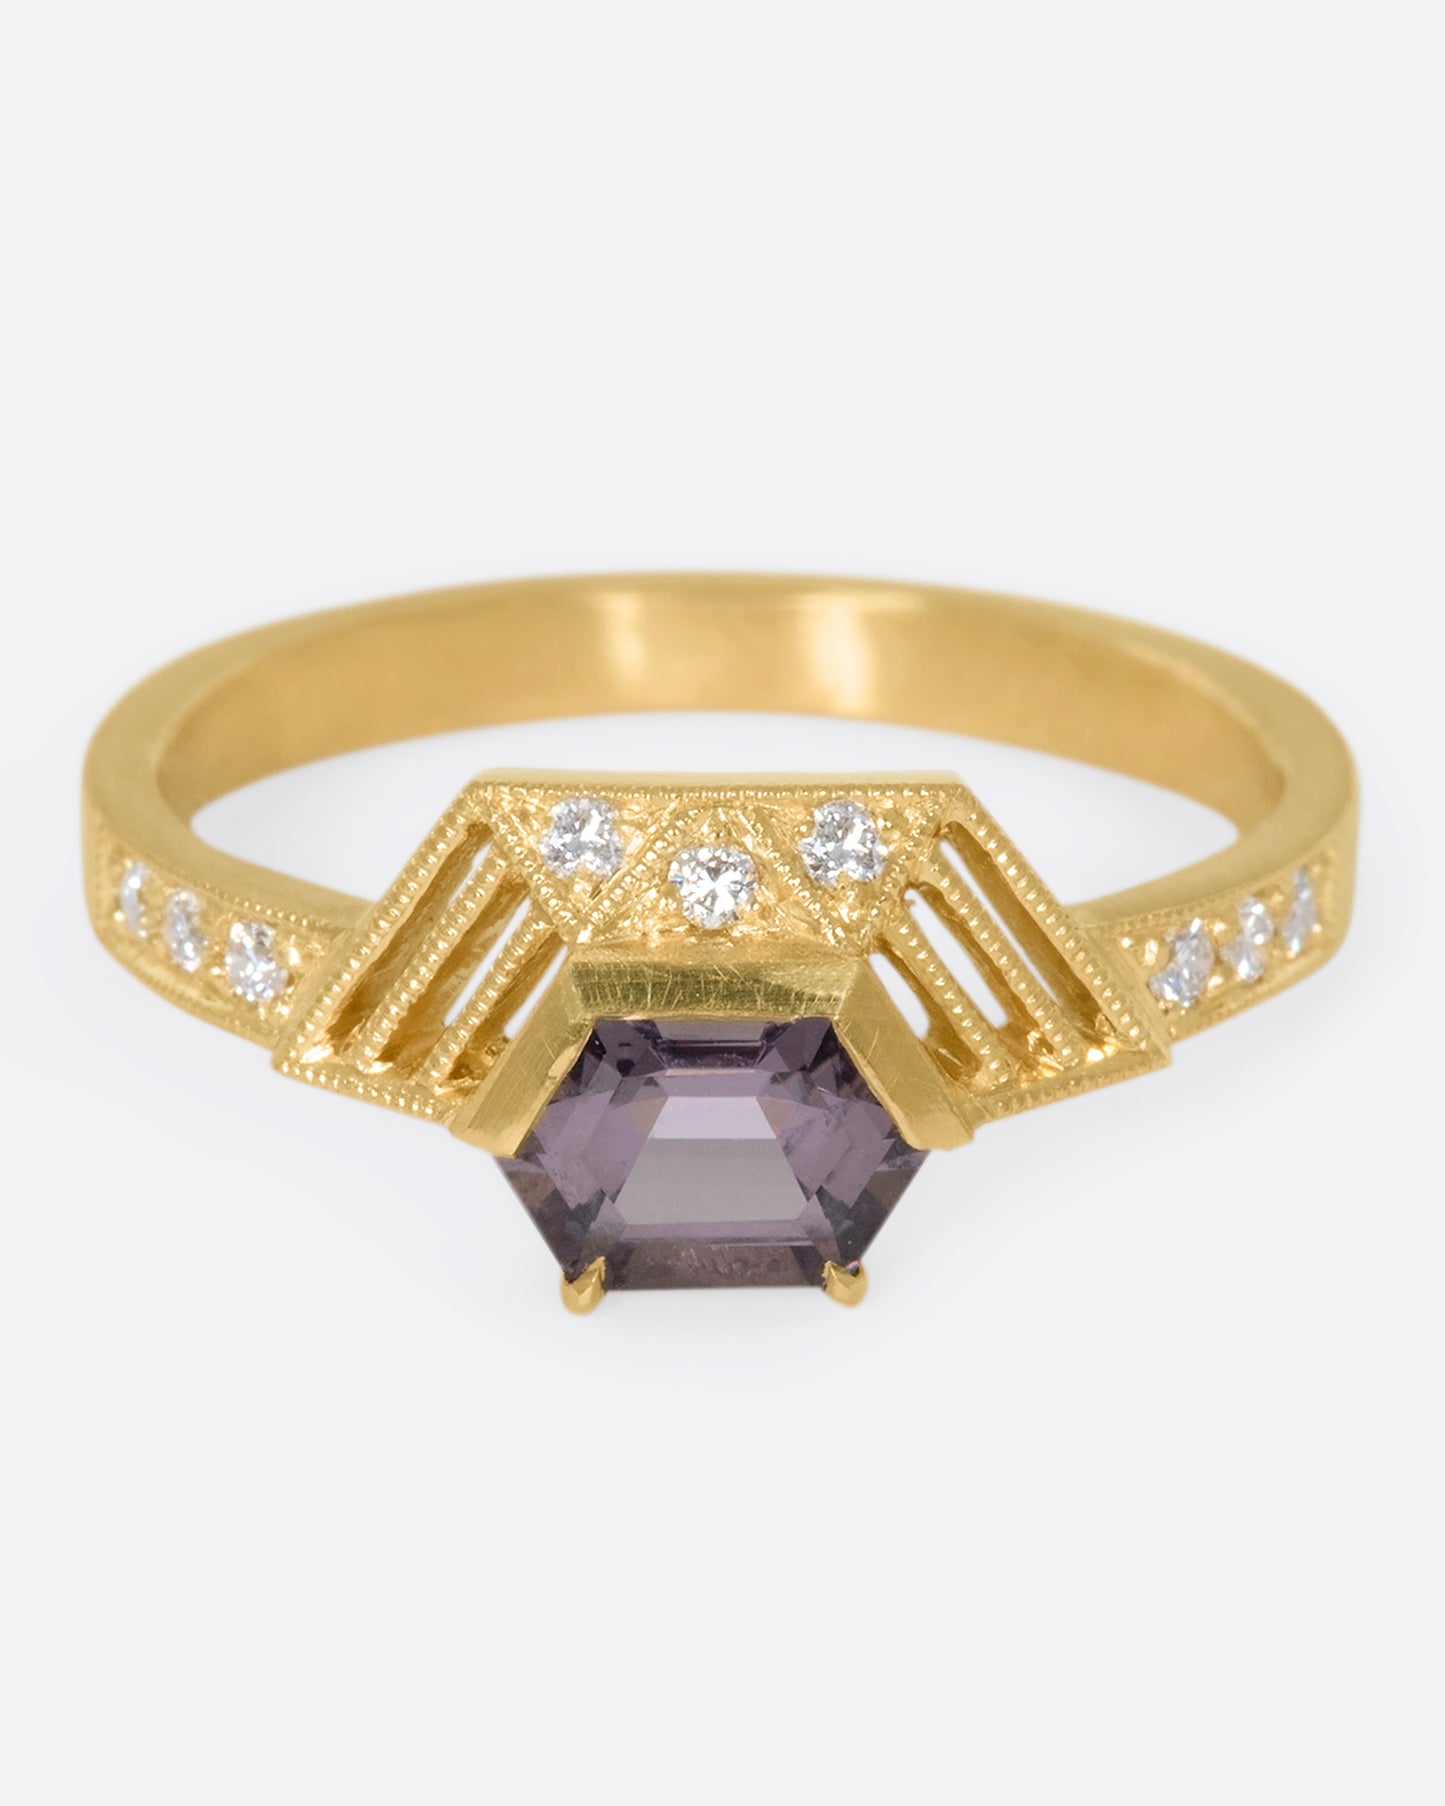 This one-of-a-kind lavender spinel ring dazzles on its own, or in a stack with other DMD Metal rings. The hexagonal half-halo feels like a modern twist on art deco design.